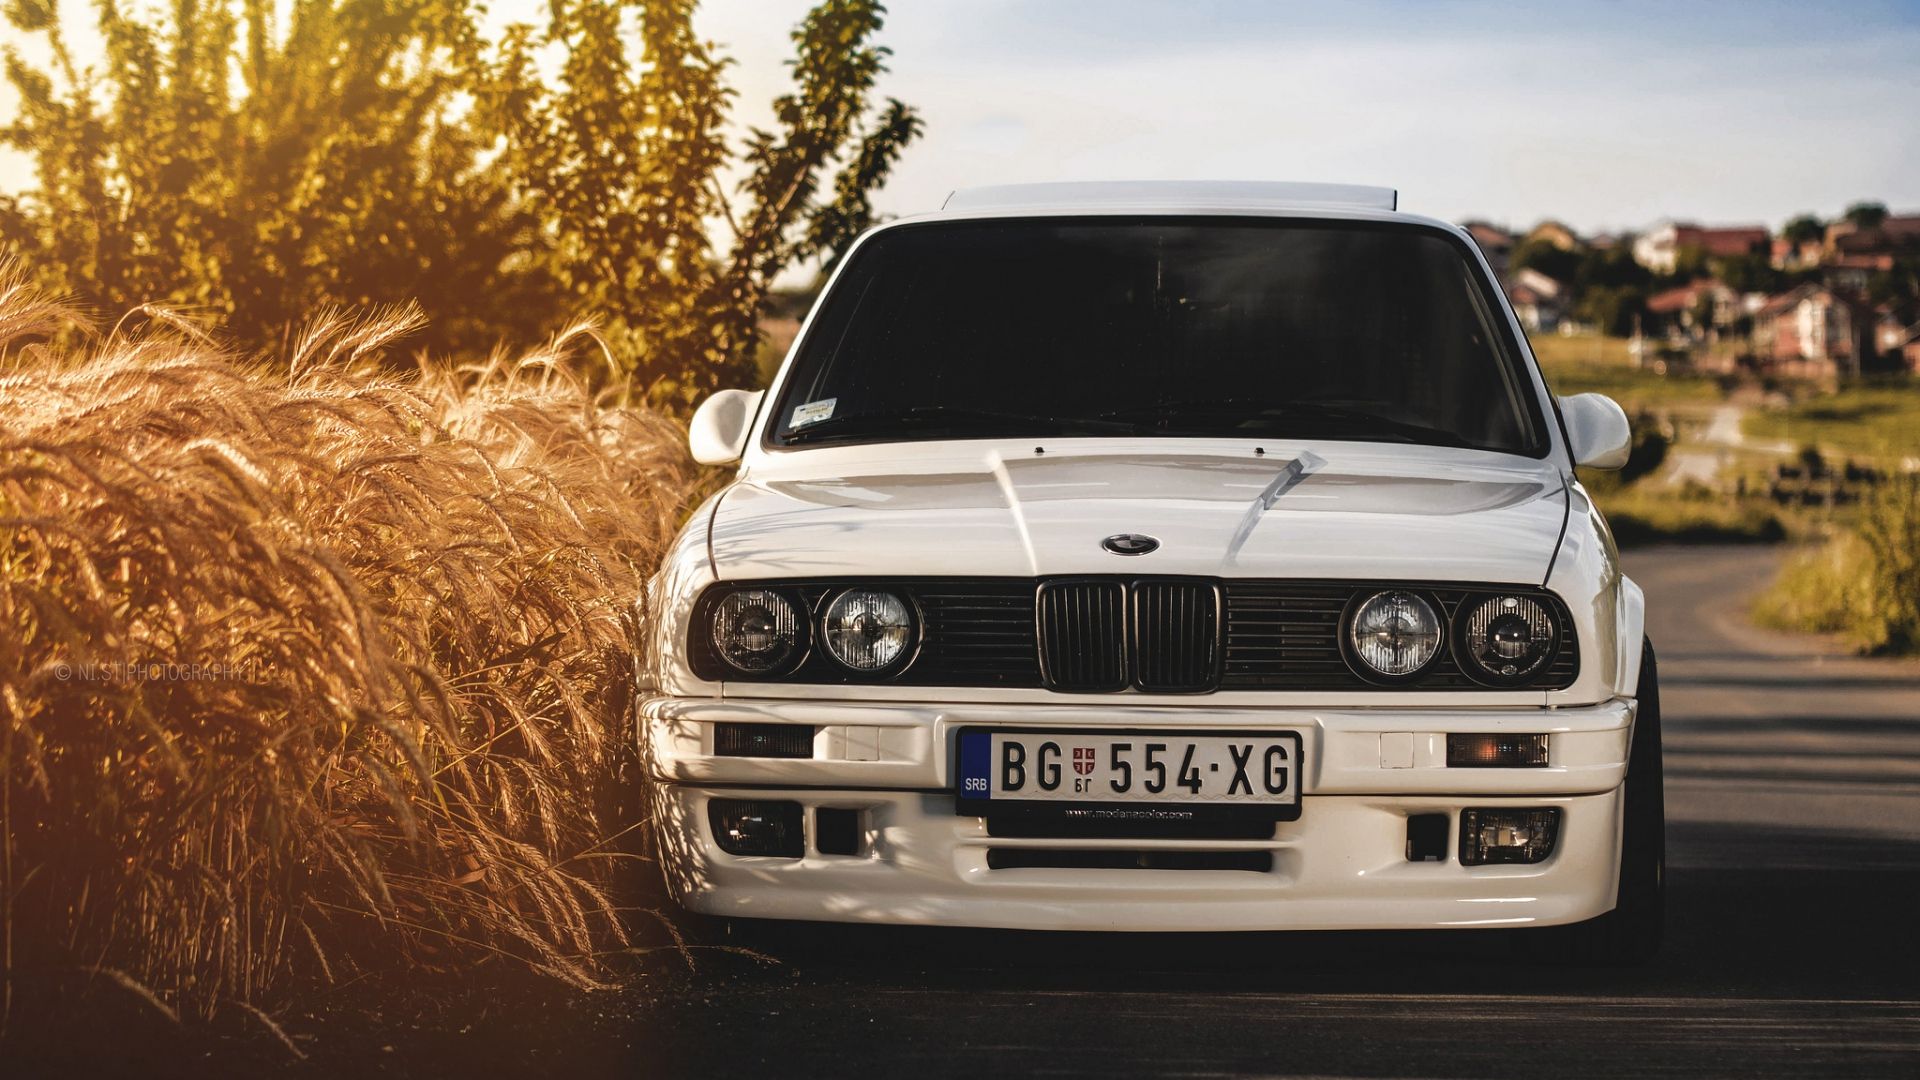 Old BMW Car Free Wallpapers 1743 - HD Wallpaper Site